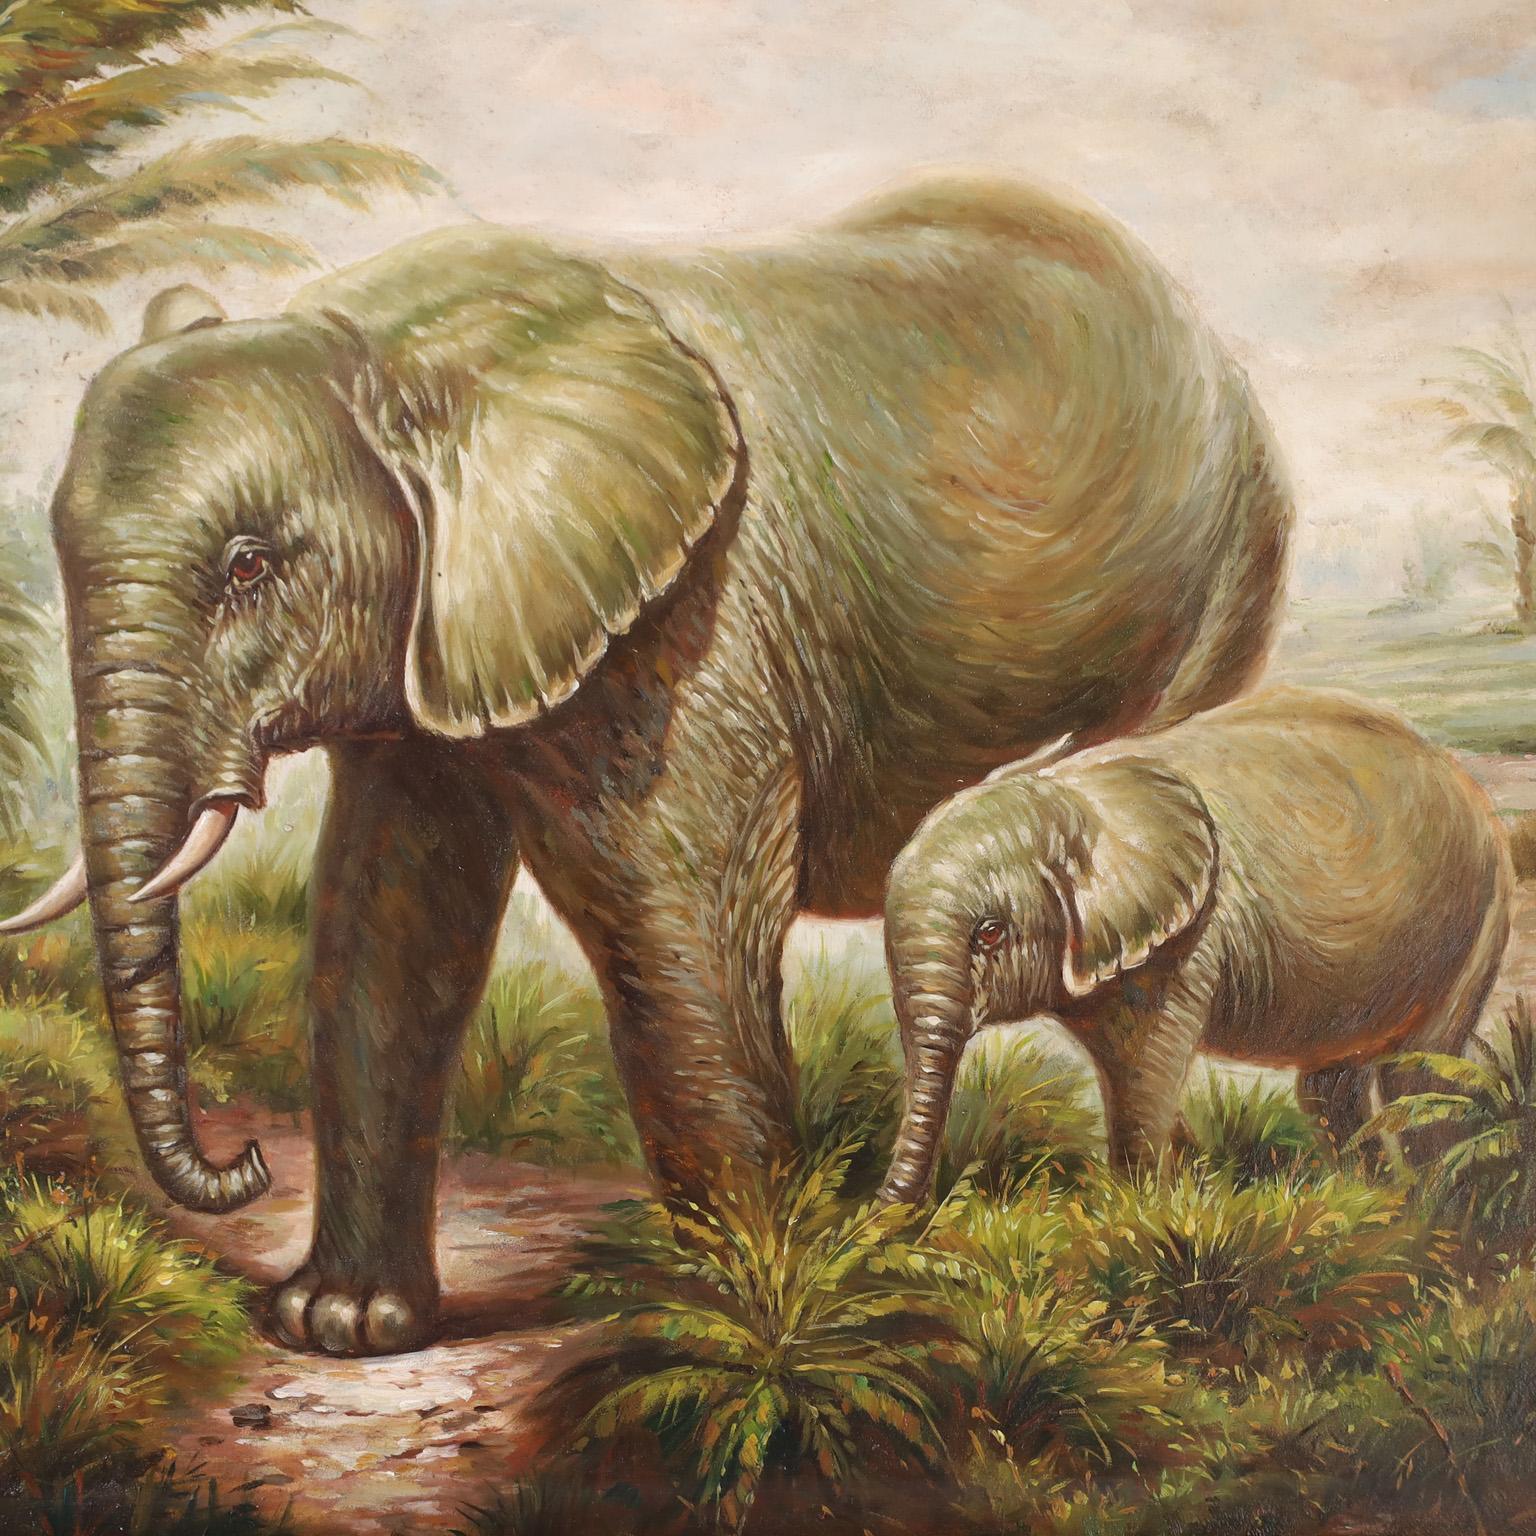 Oil Painting of African Elephants by Maitland-Smith - Brown Animal Painting by Unknown